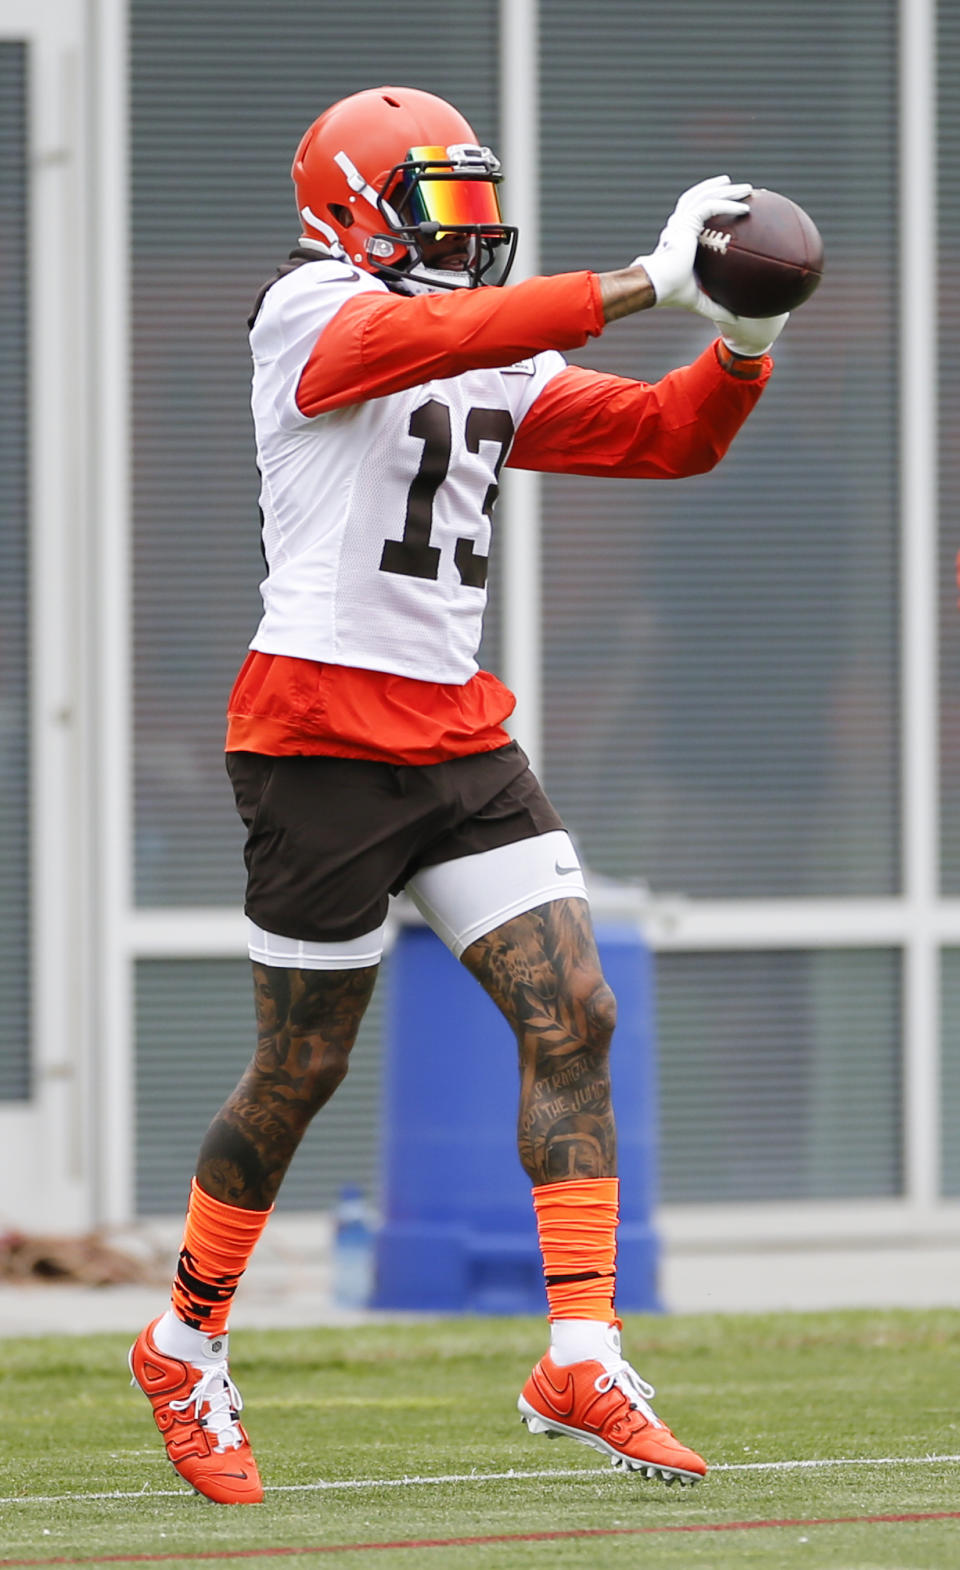 Cleveland Browns wide receiver Odell Beckham Jr. runs a drill at the team's NFL football training facility in Berea, Ohio, Tuesday, June 4, 2019. (AP Photo/Ron Schwane)